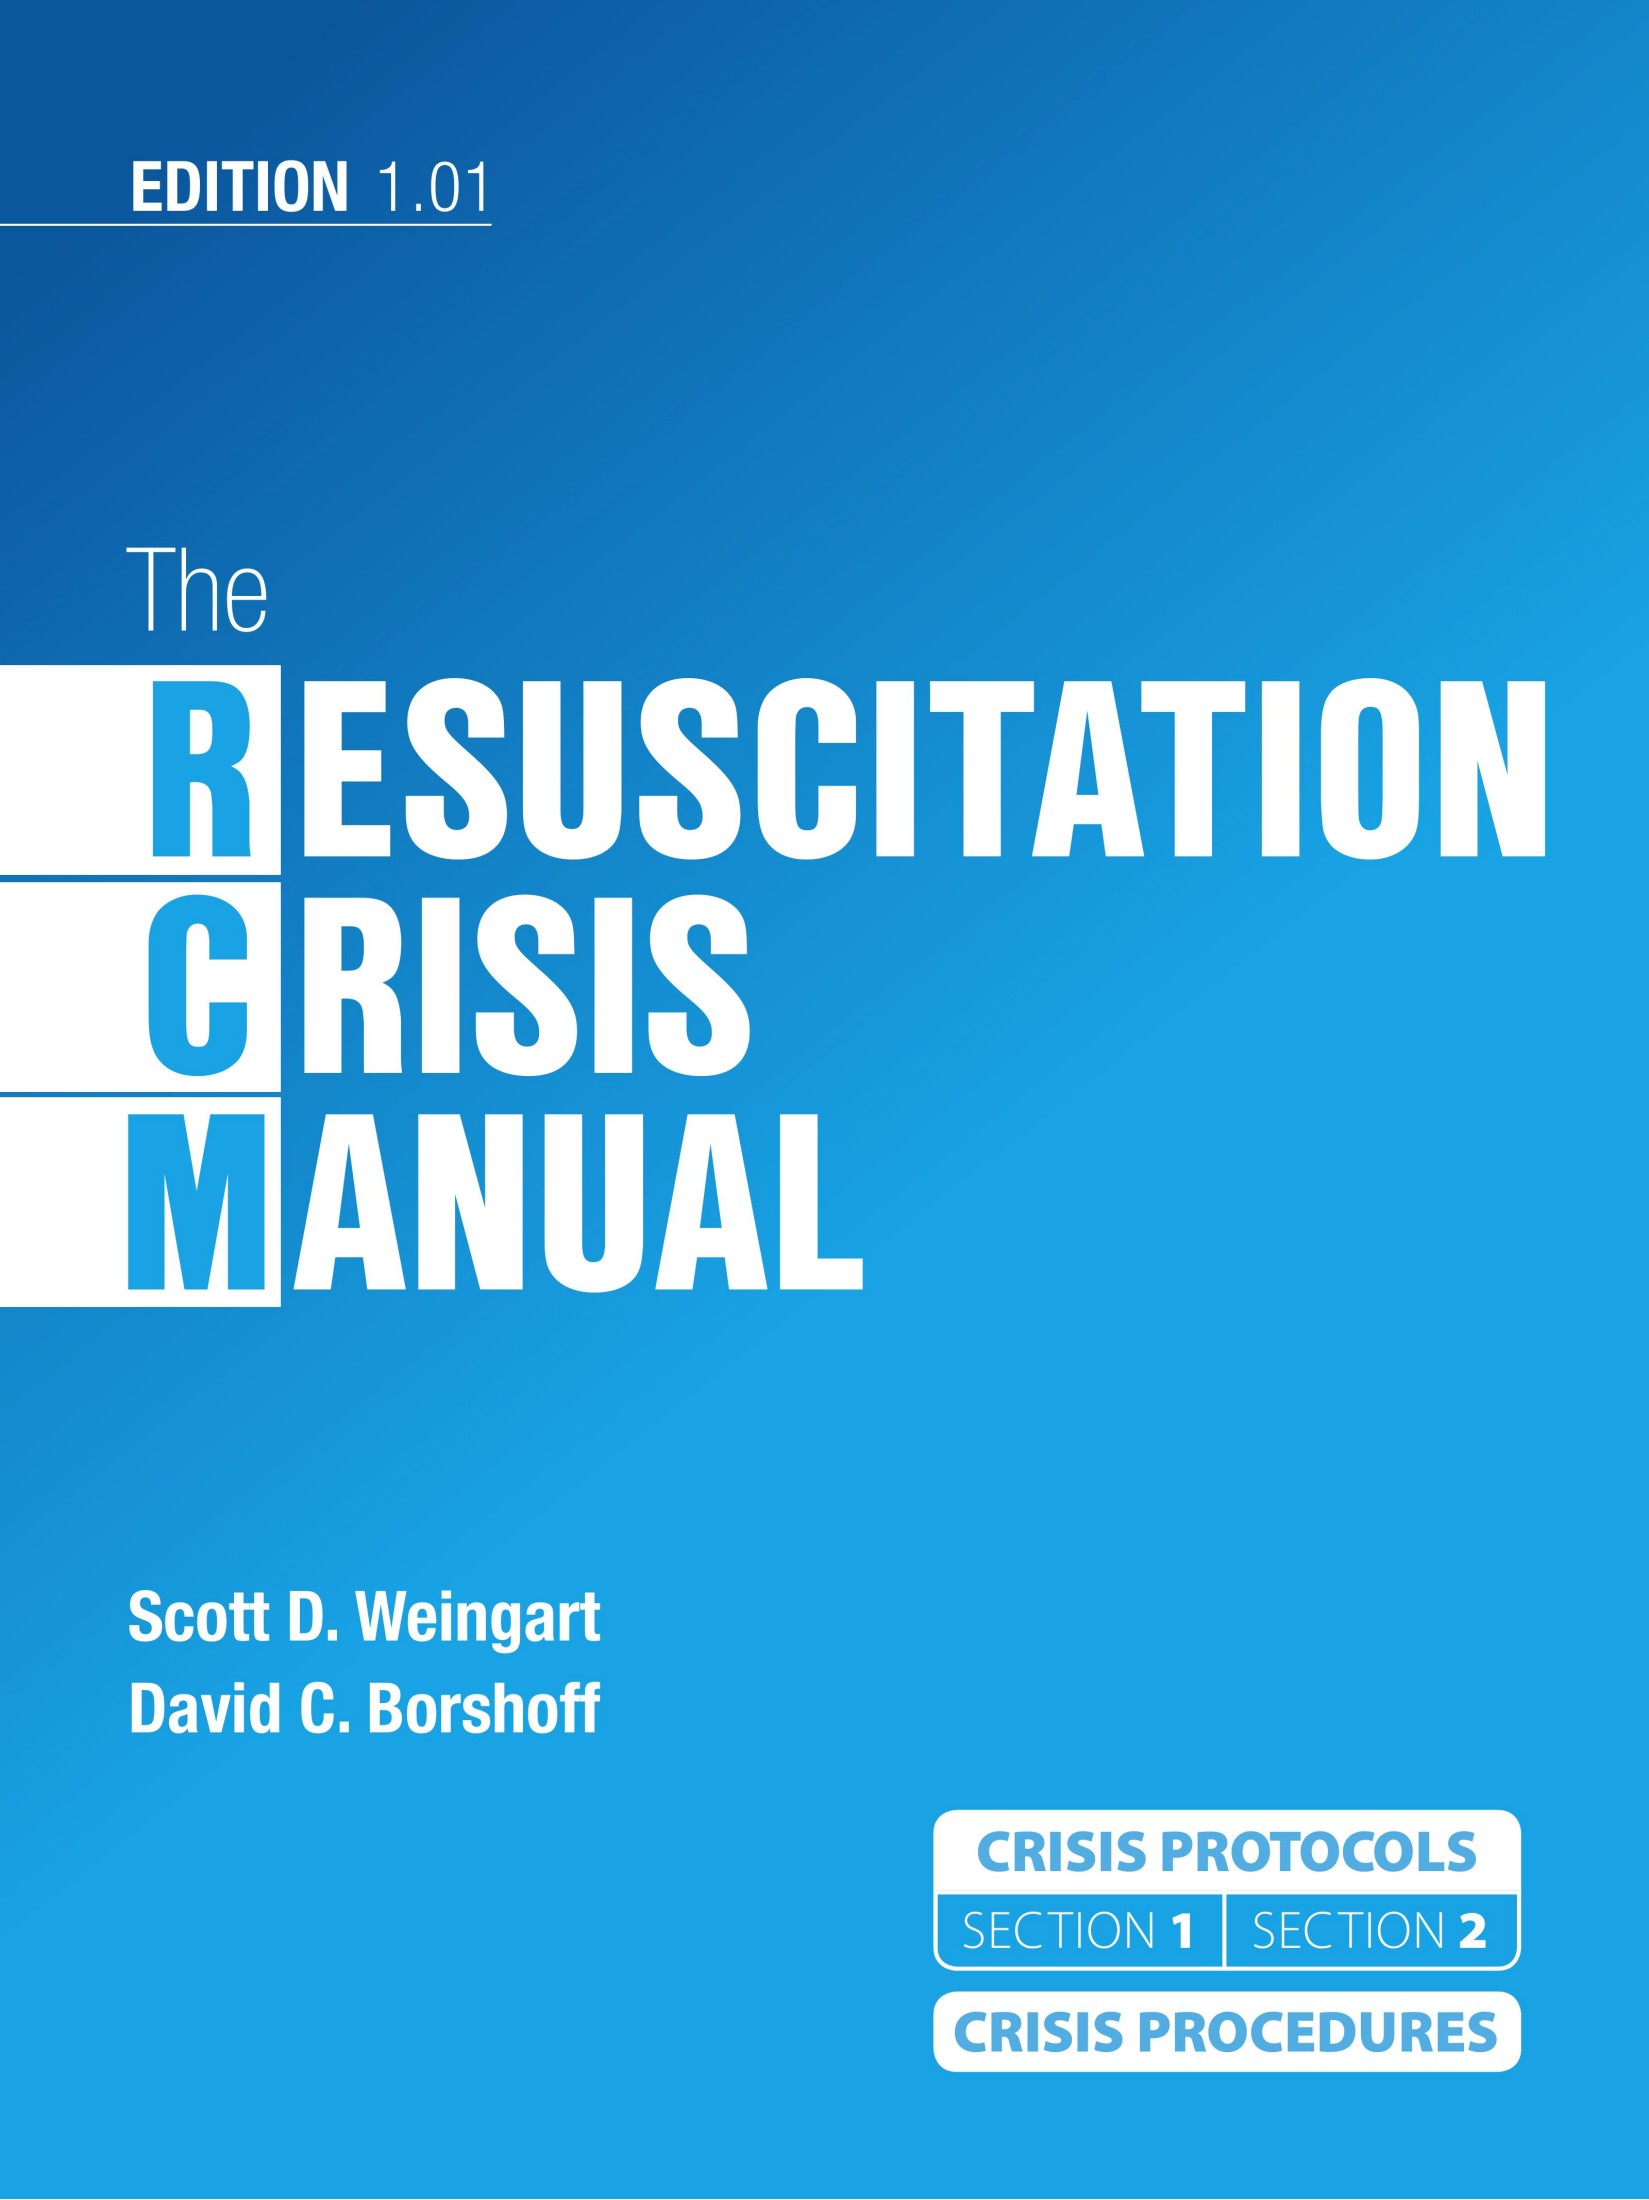 The Anaesthetic crisis manual (2017)